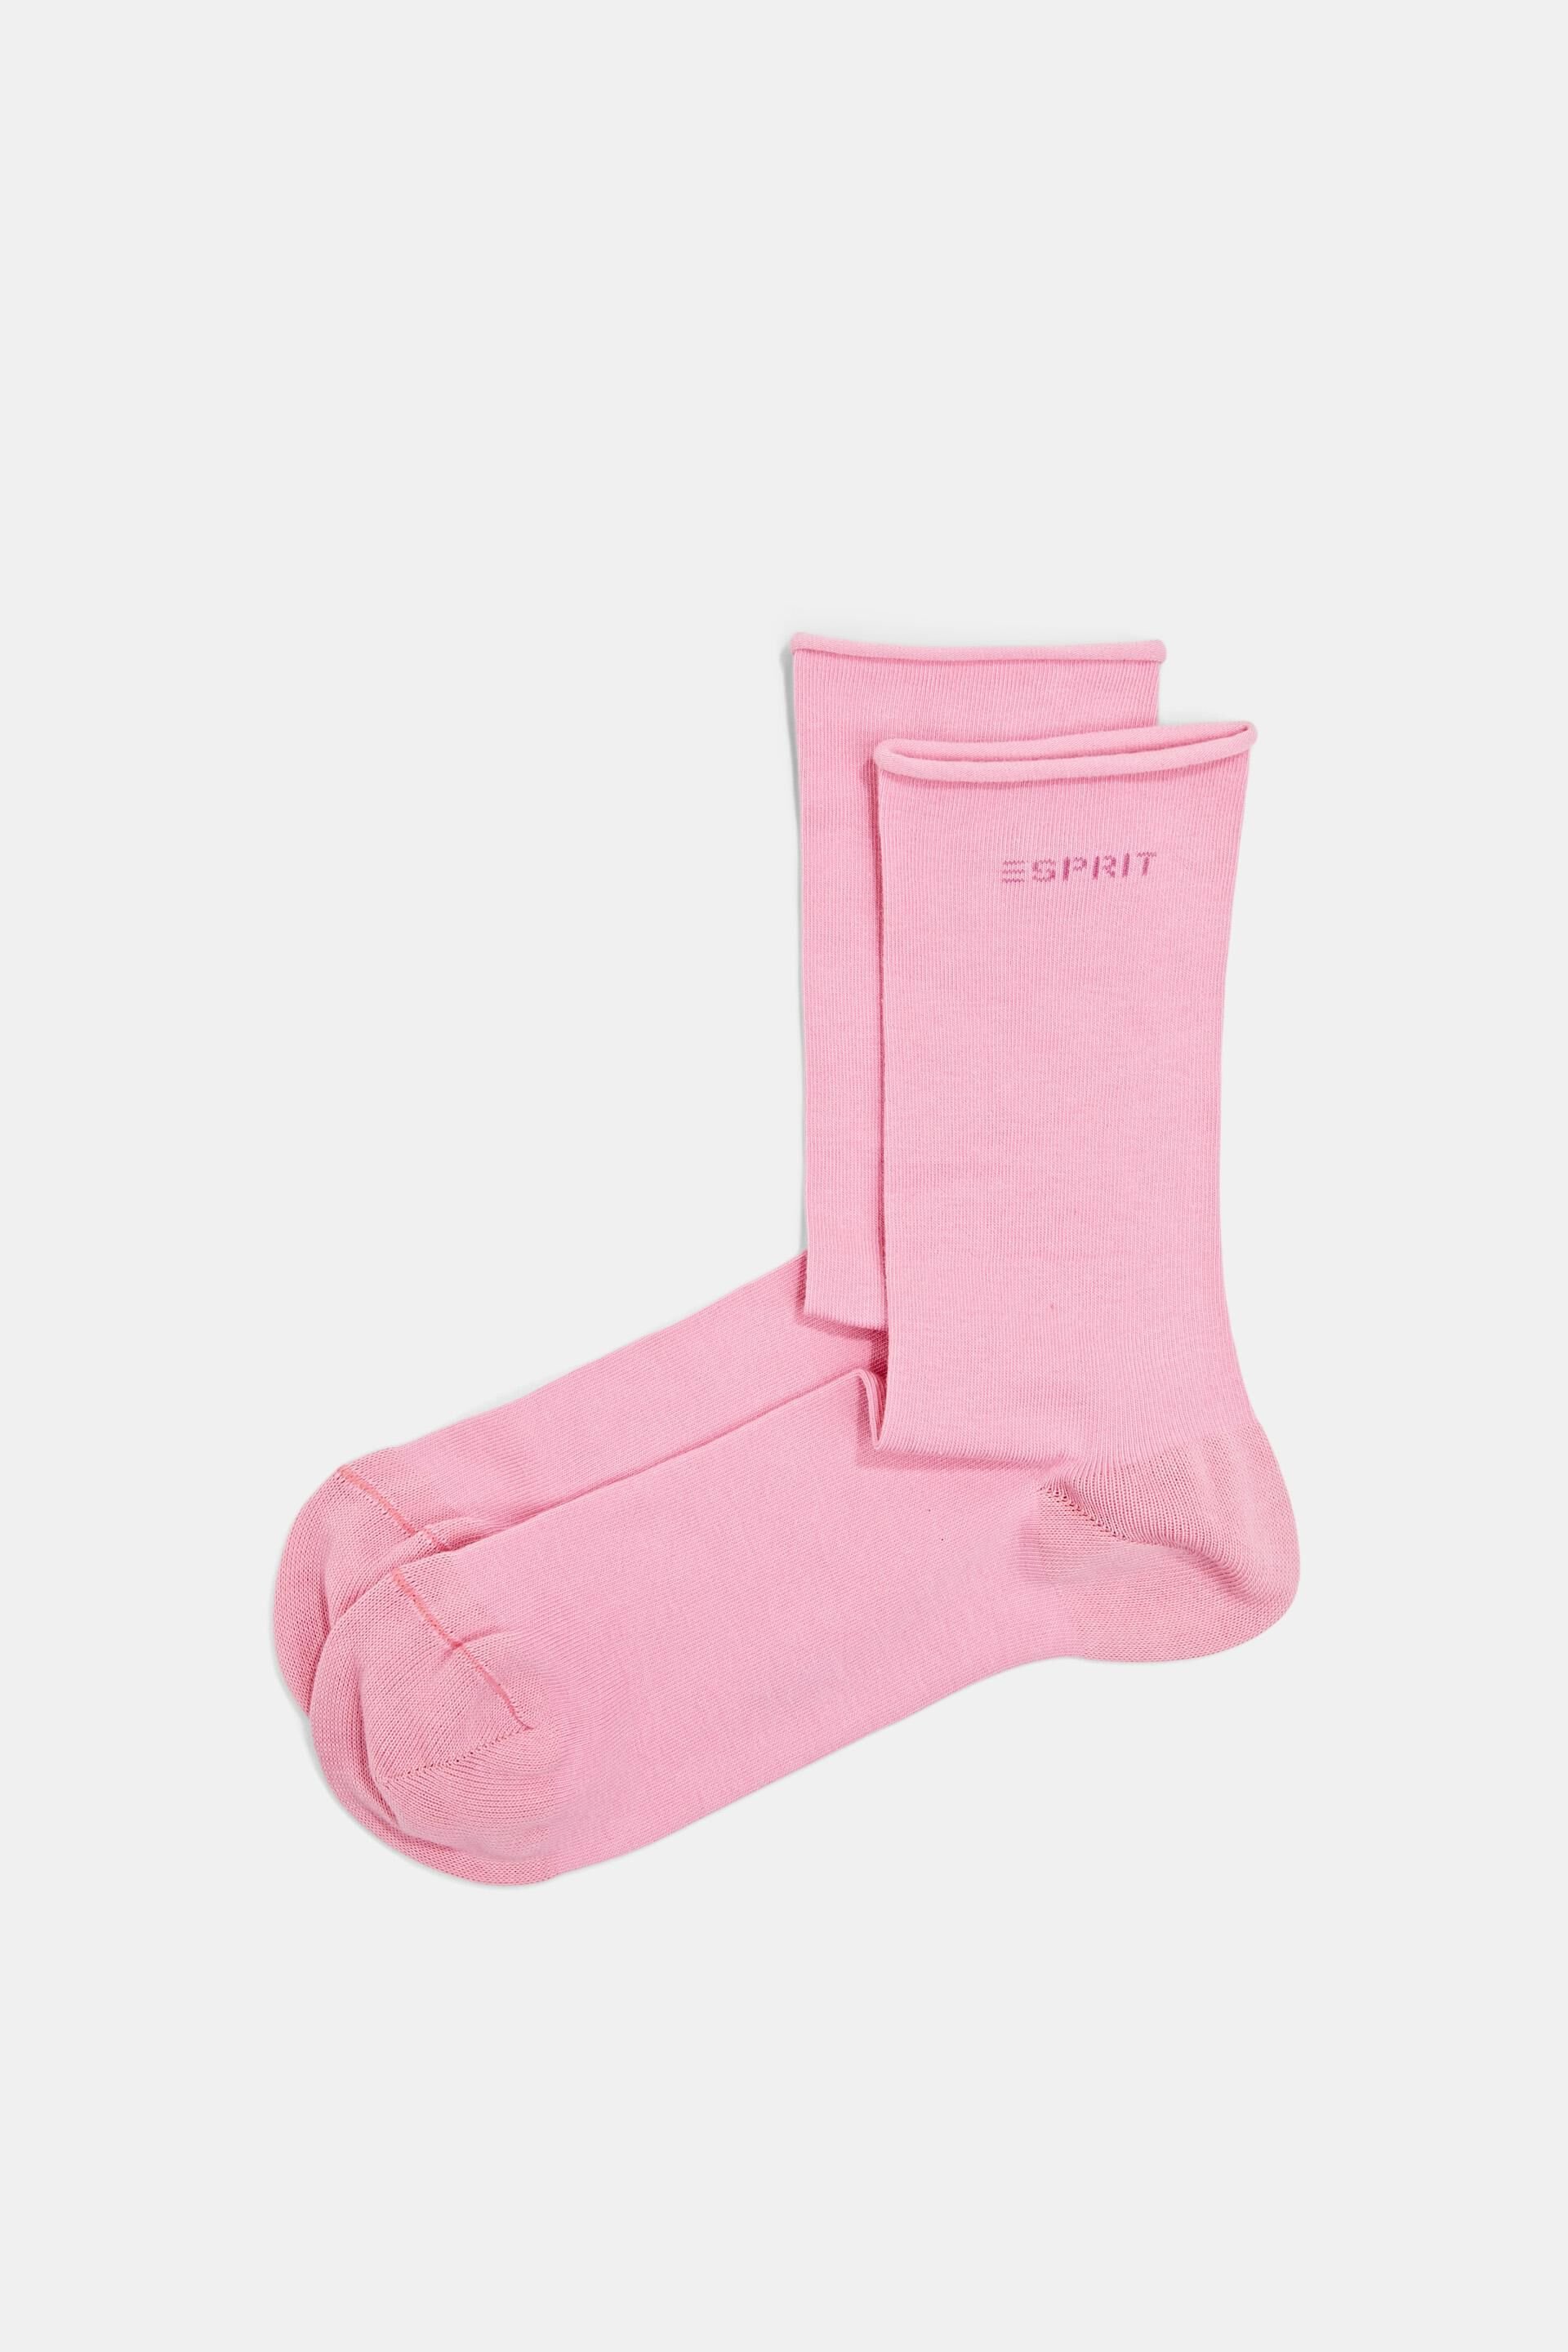 Esprit Online Store 2-pack of sock with rolled edges, organic cotton